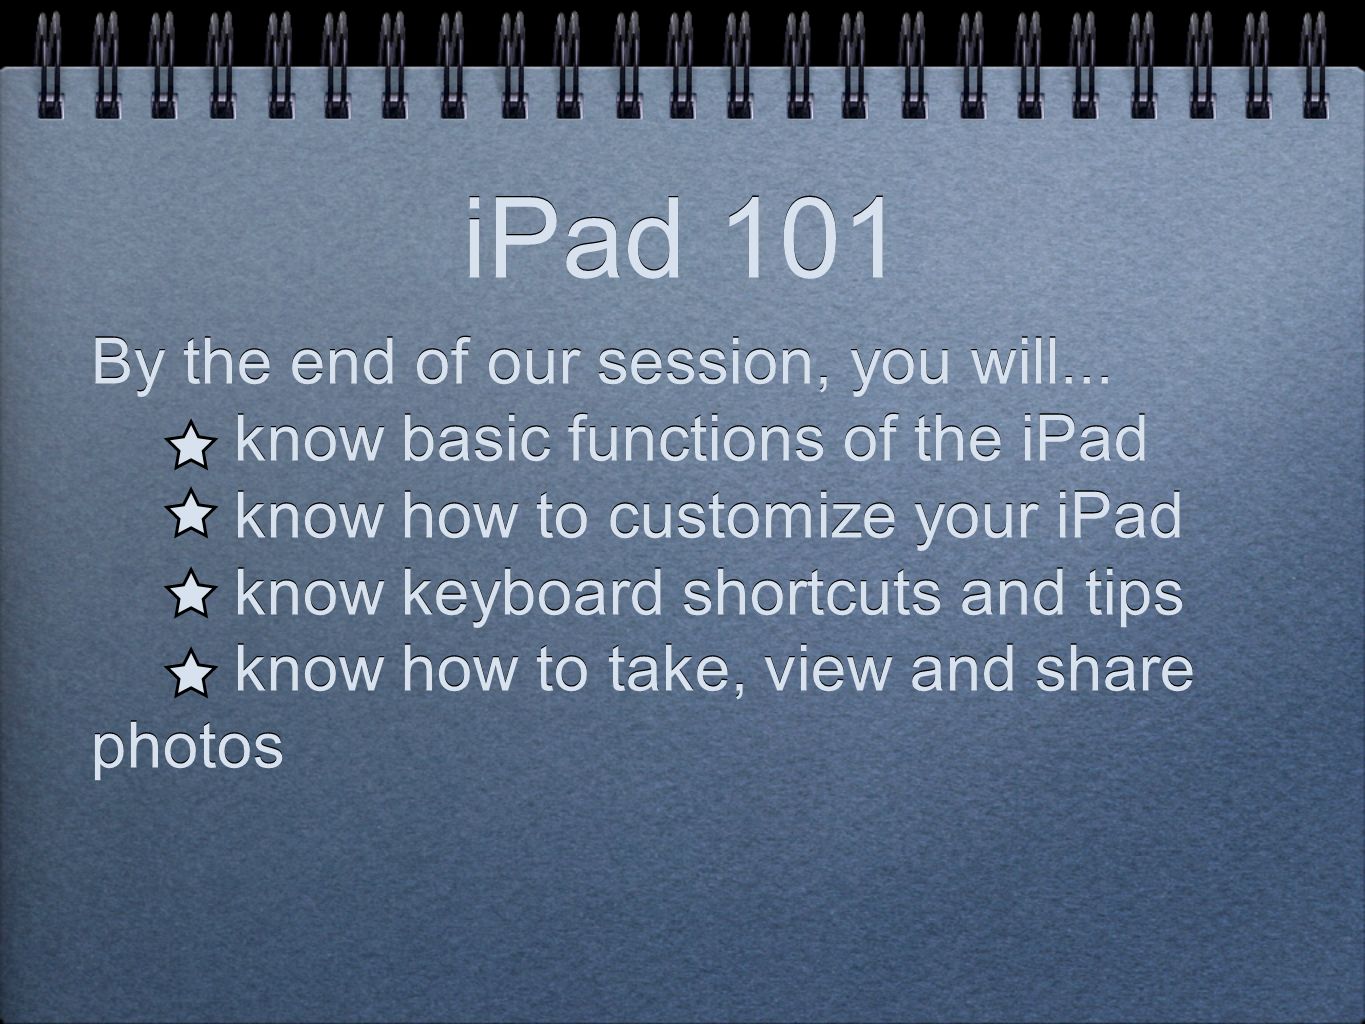 iPad 101 By the end of our session, you will...